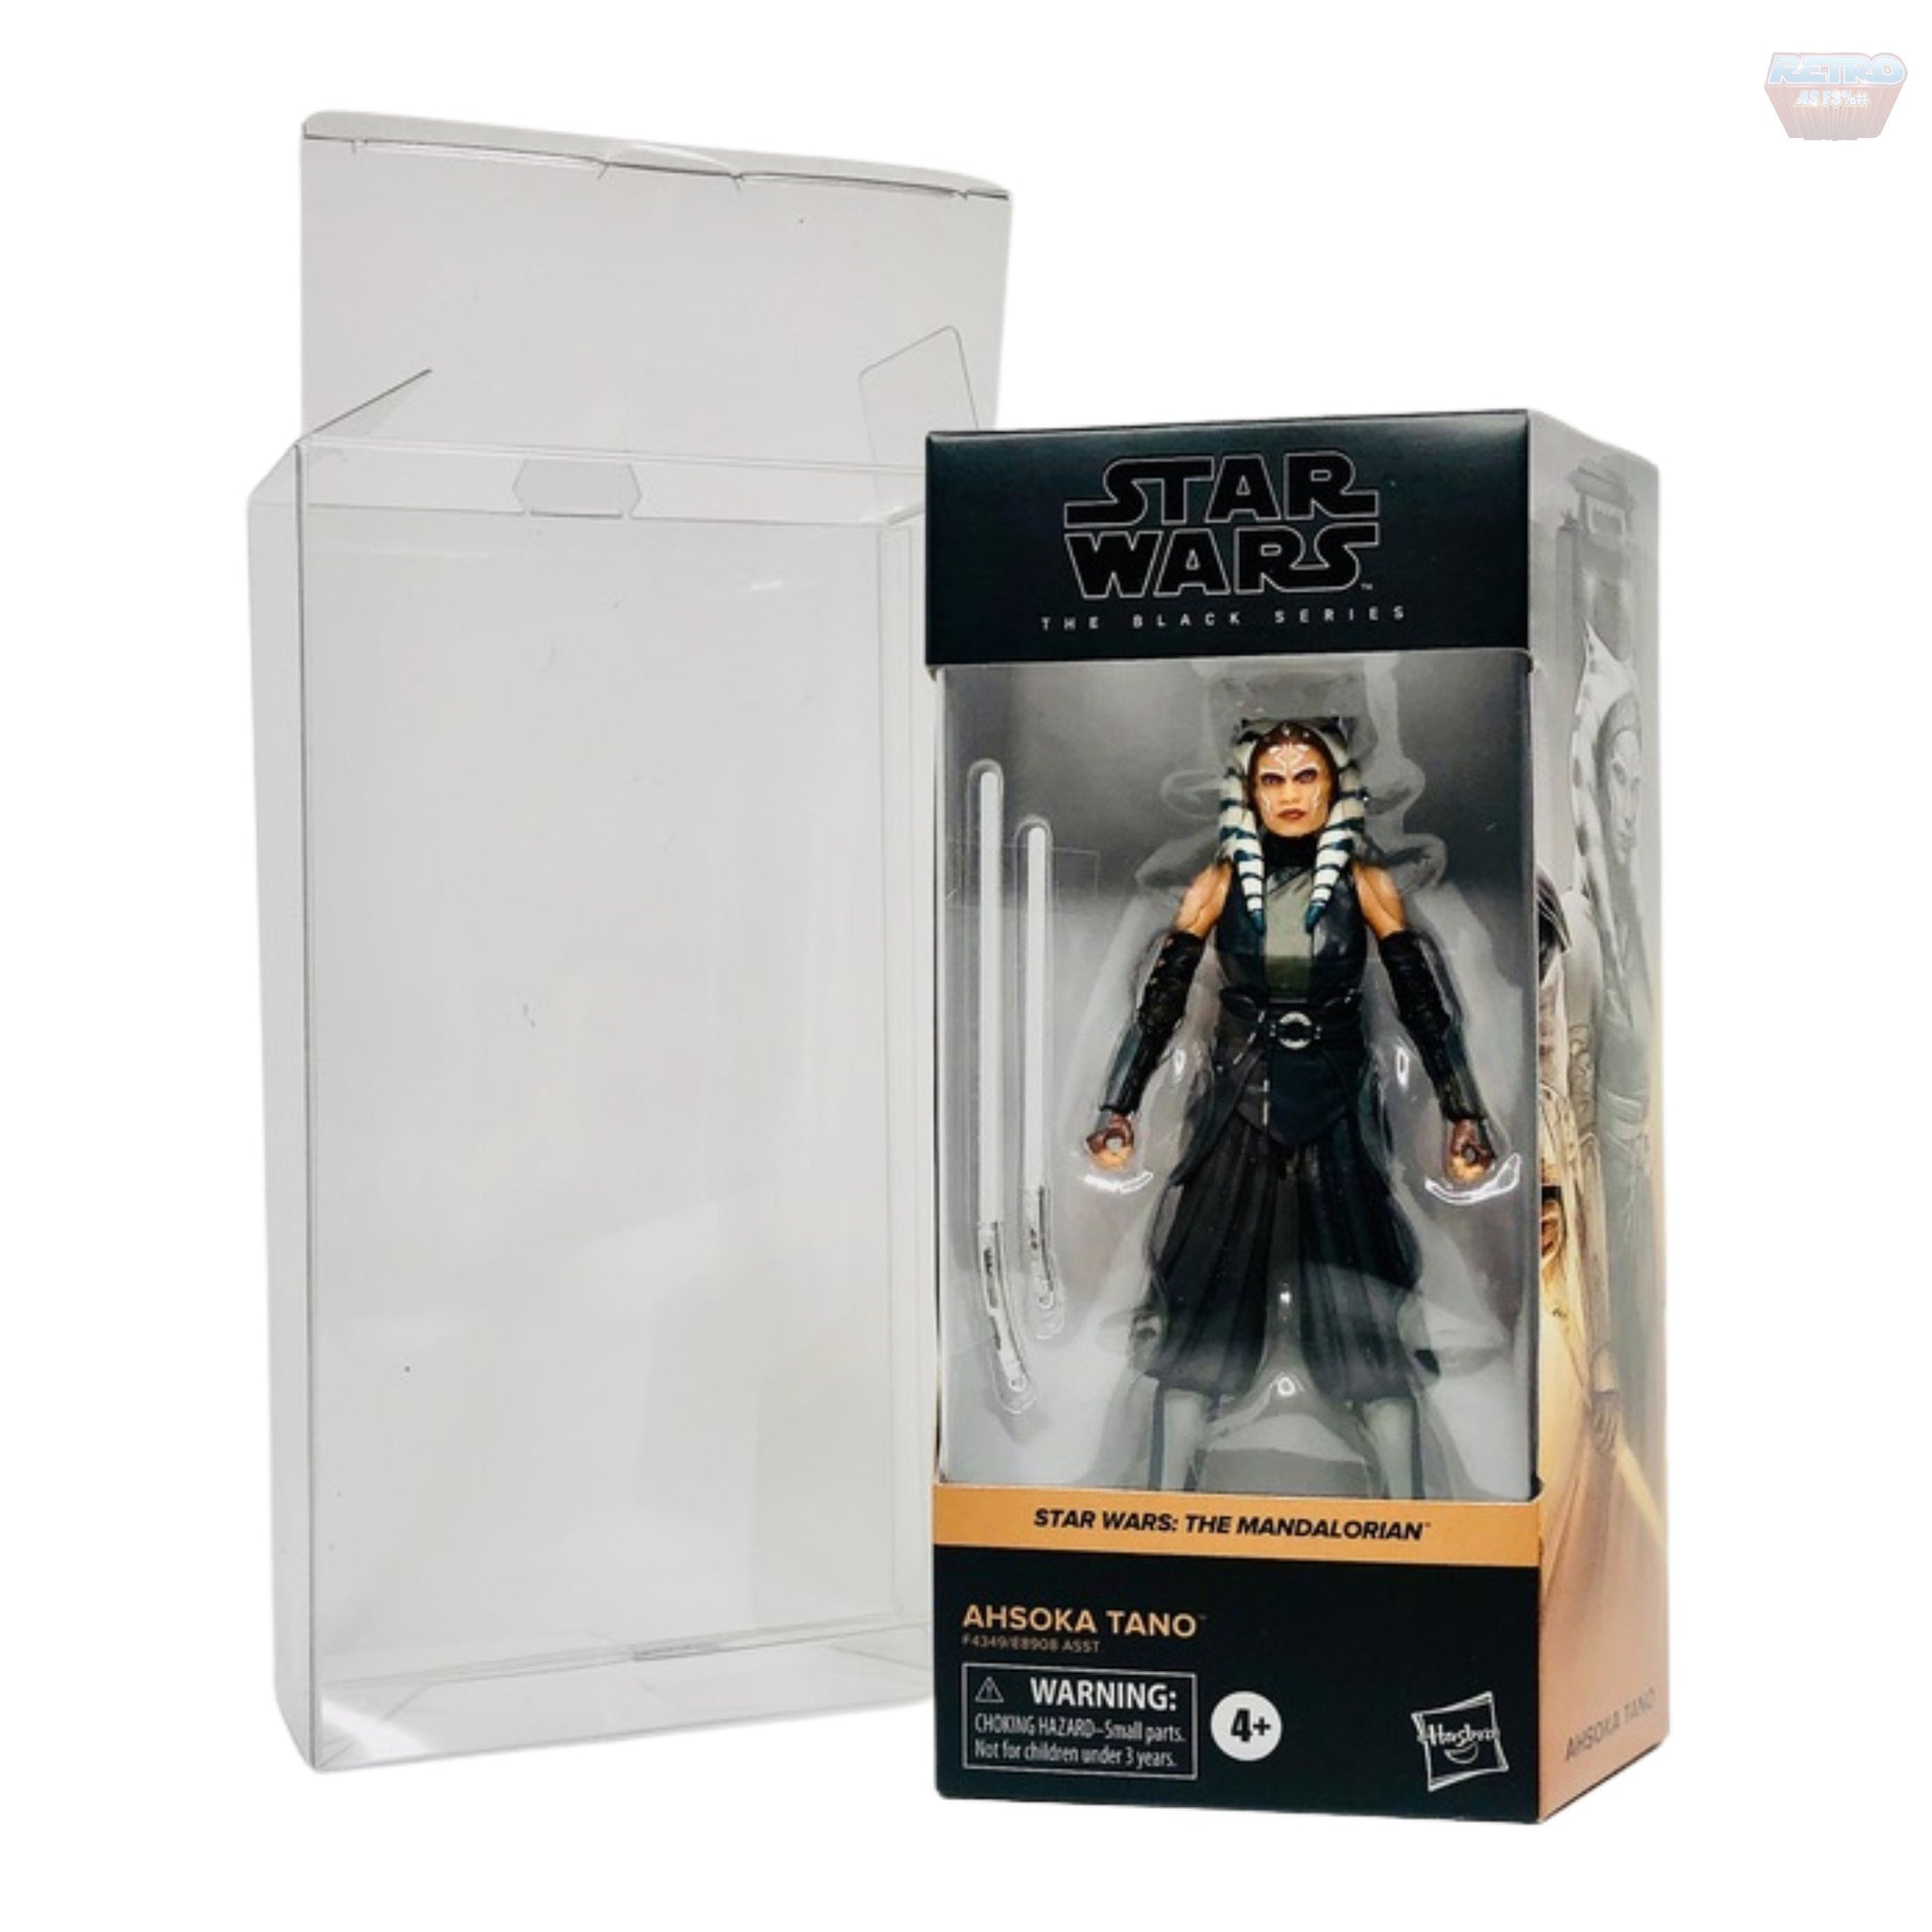 Action Figure Protectors For Star Wars Protective Cases For Sale